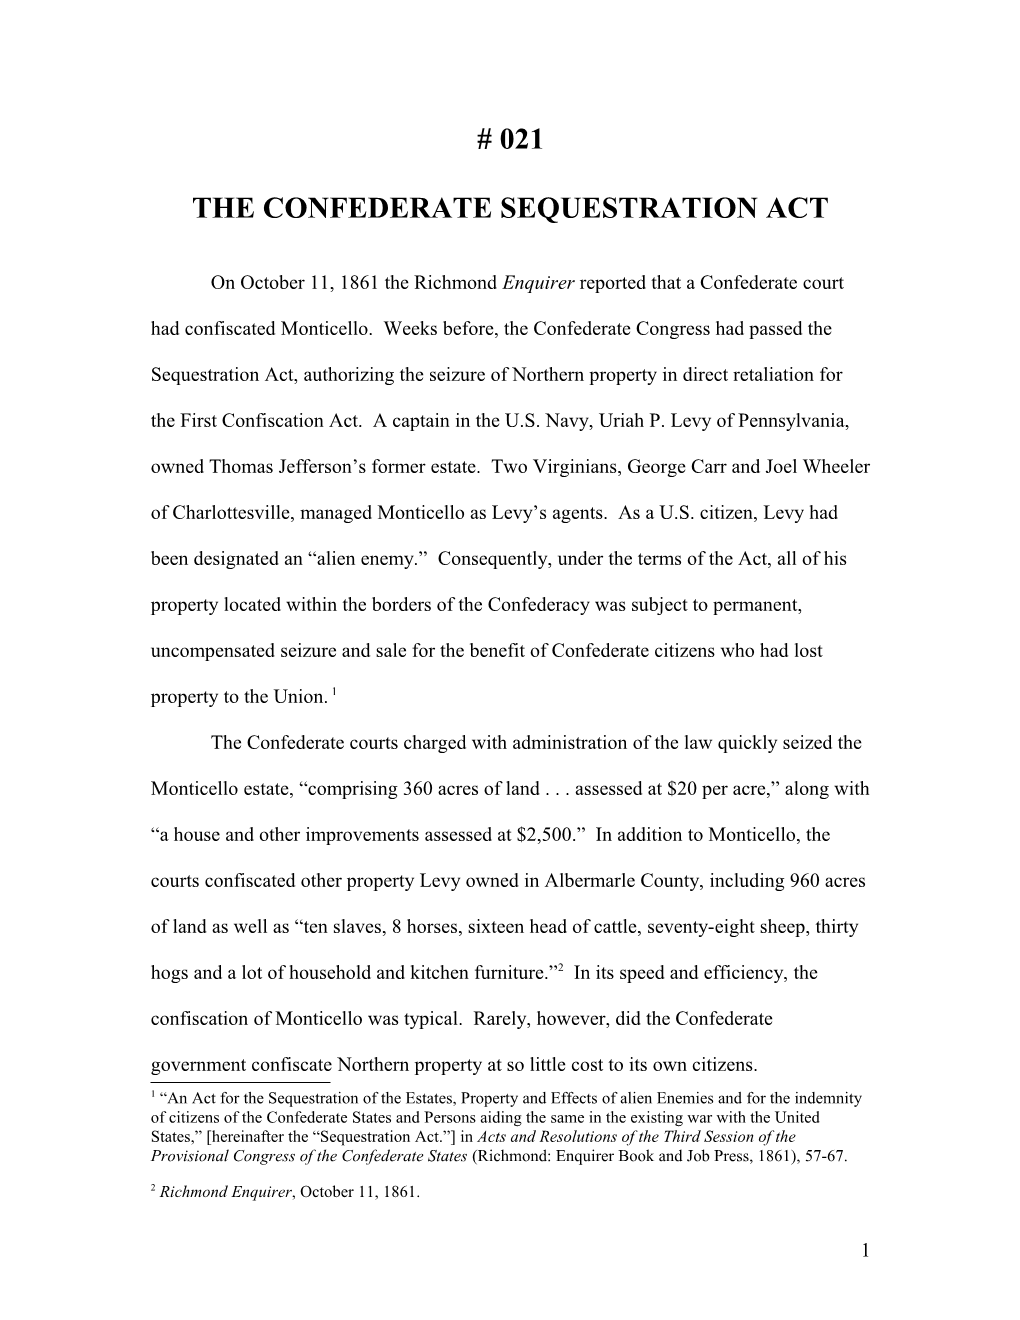 The Confederate Sequestration Act